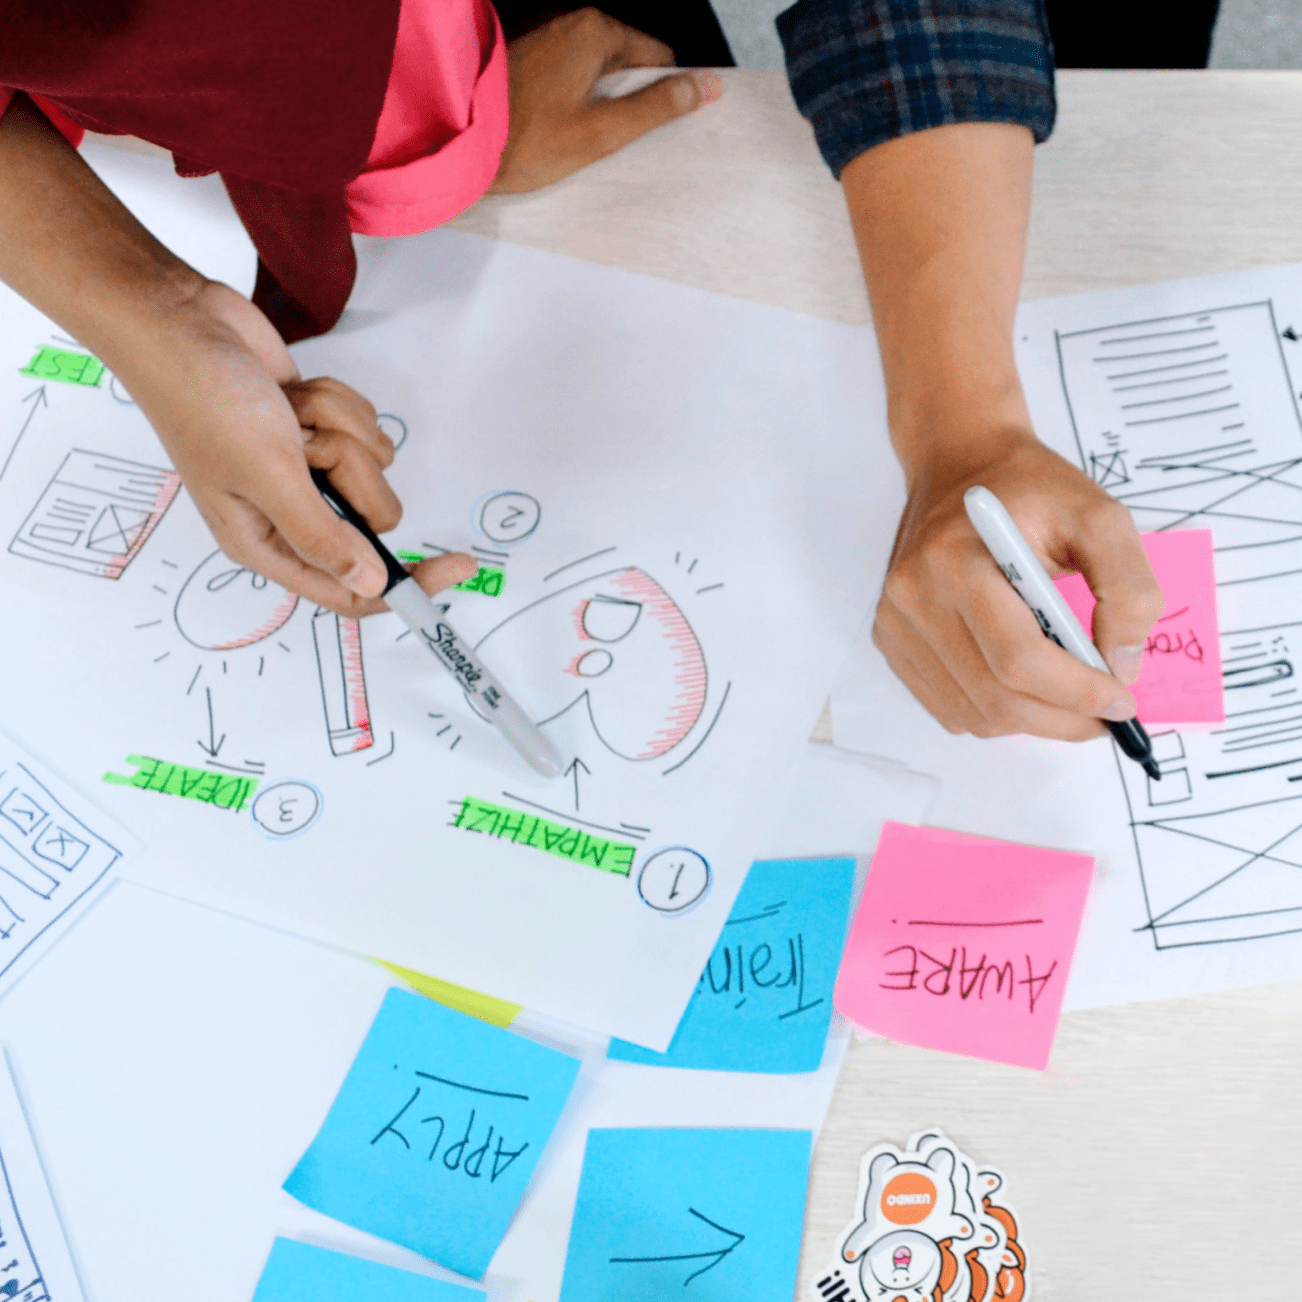 A primer on UX: The user and their experiences